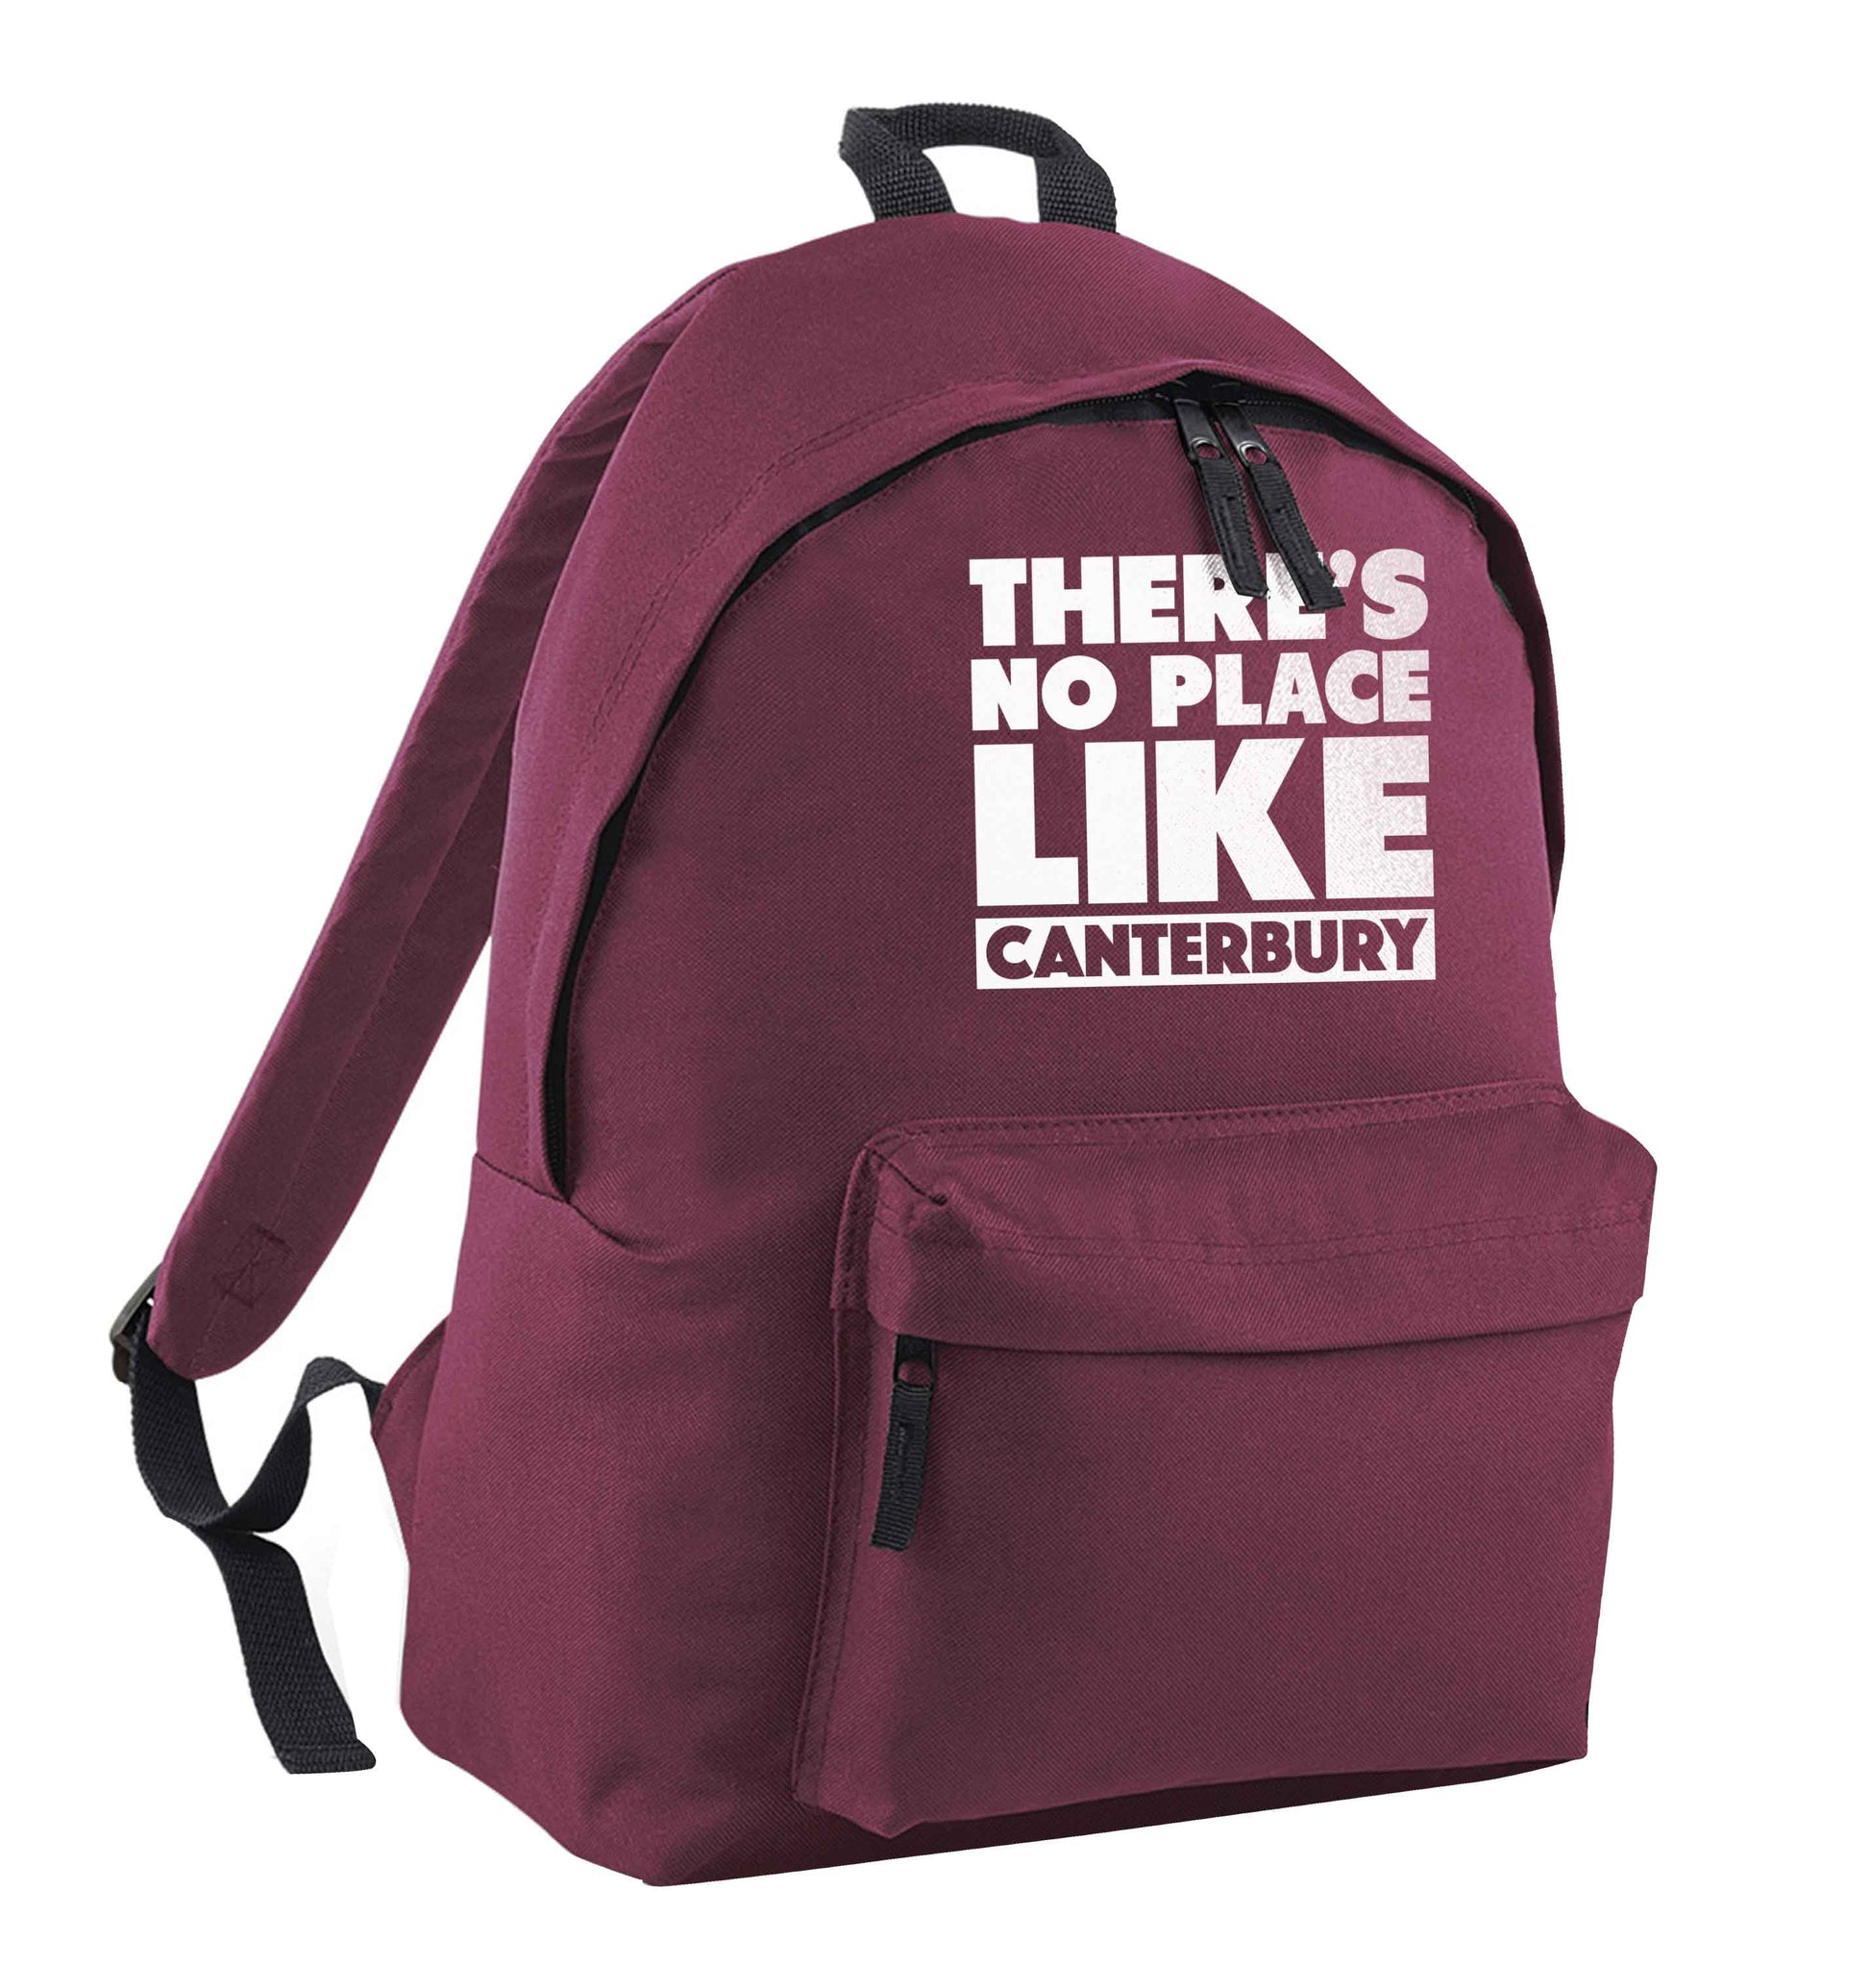 There's no place like Canterbury maroon adults backpack